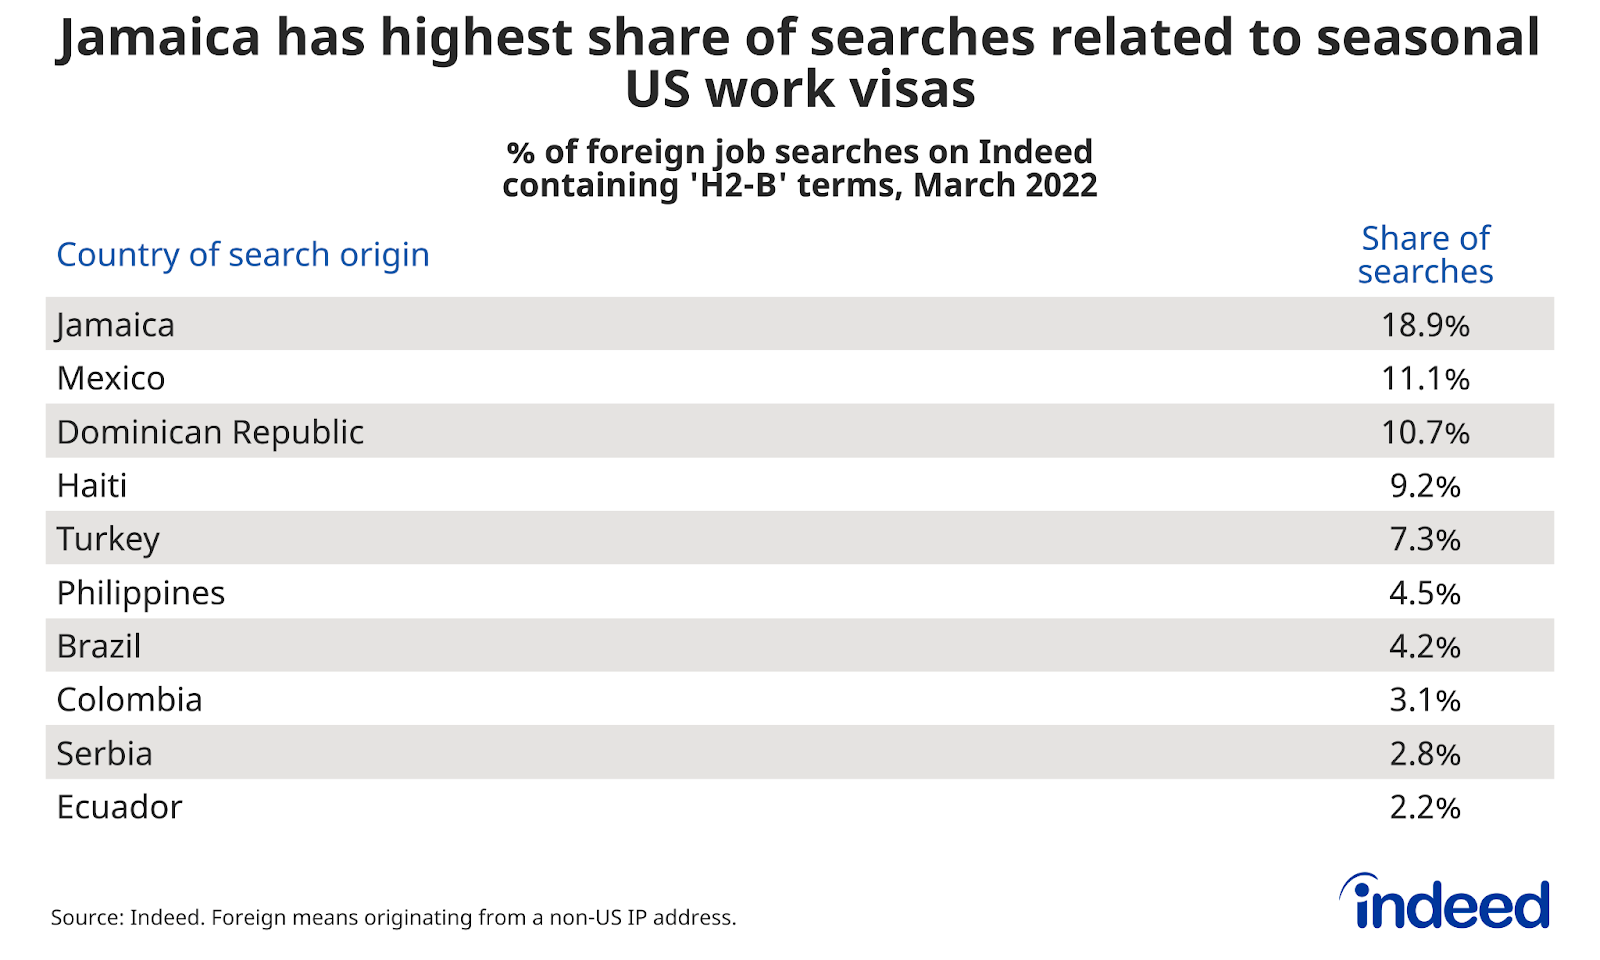 Table titled “Jamaica has highest share of searches related to seasonal US work visas.”